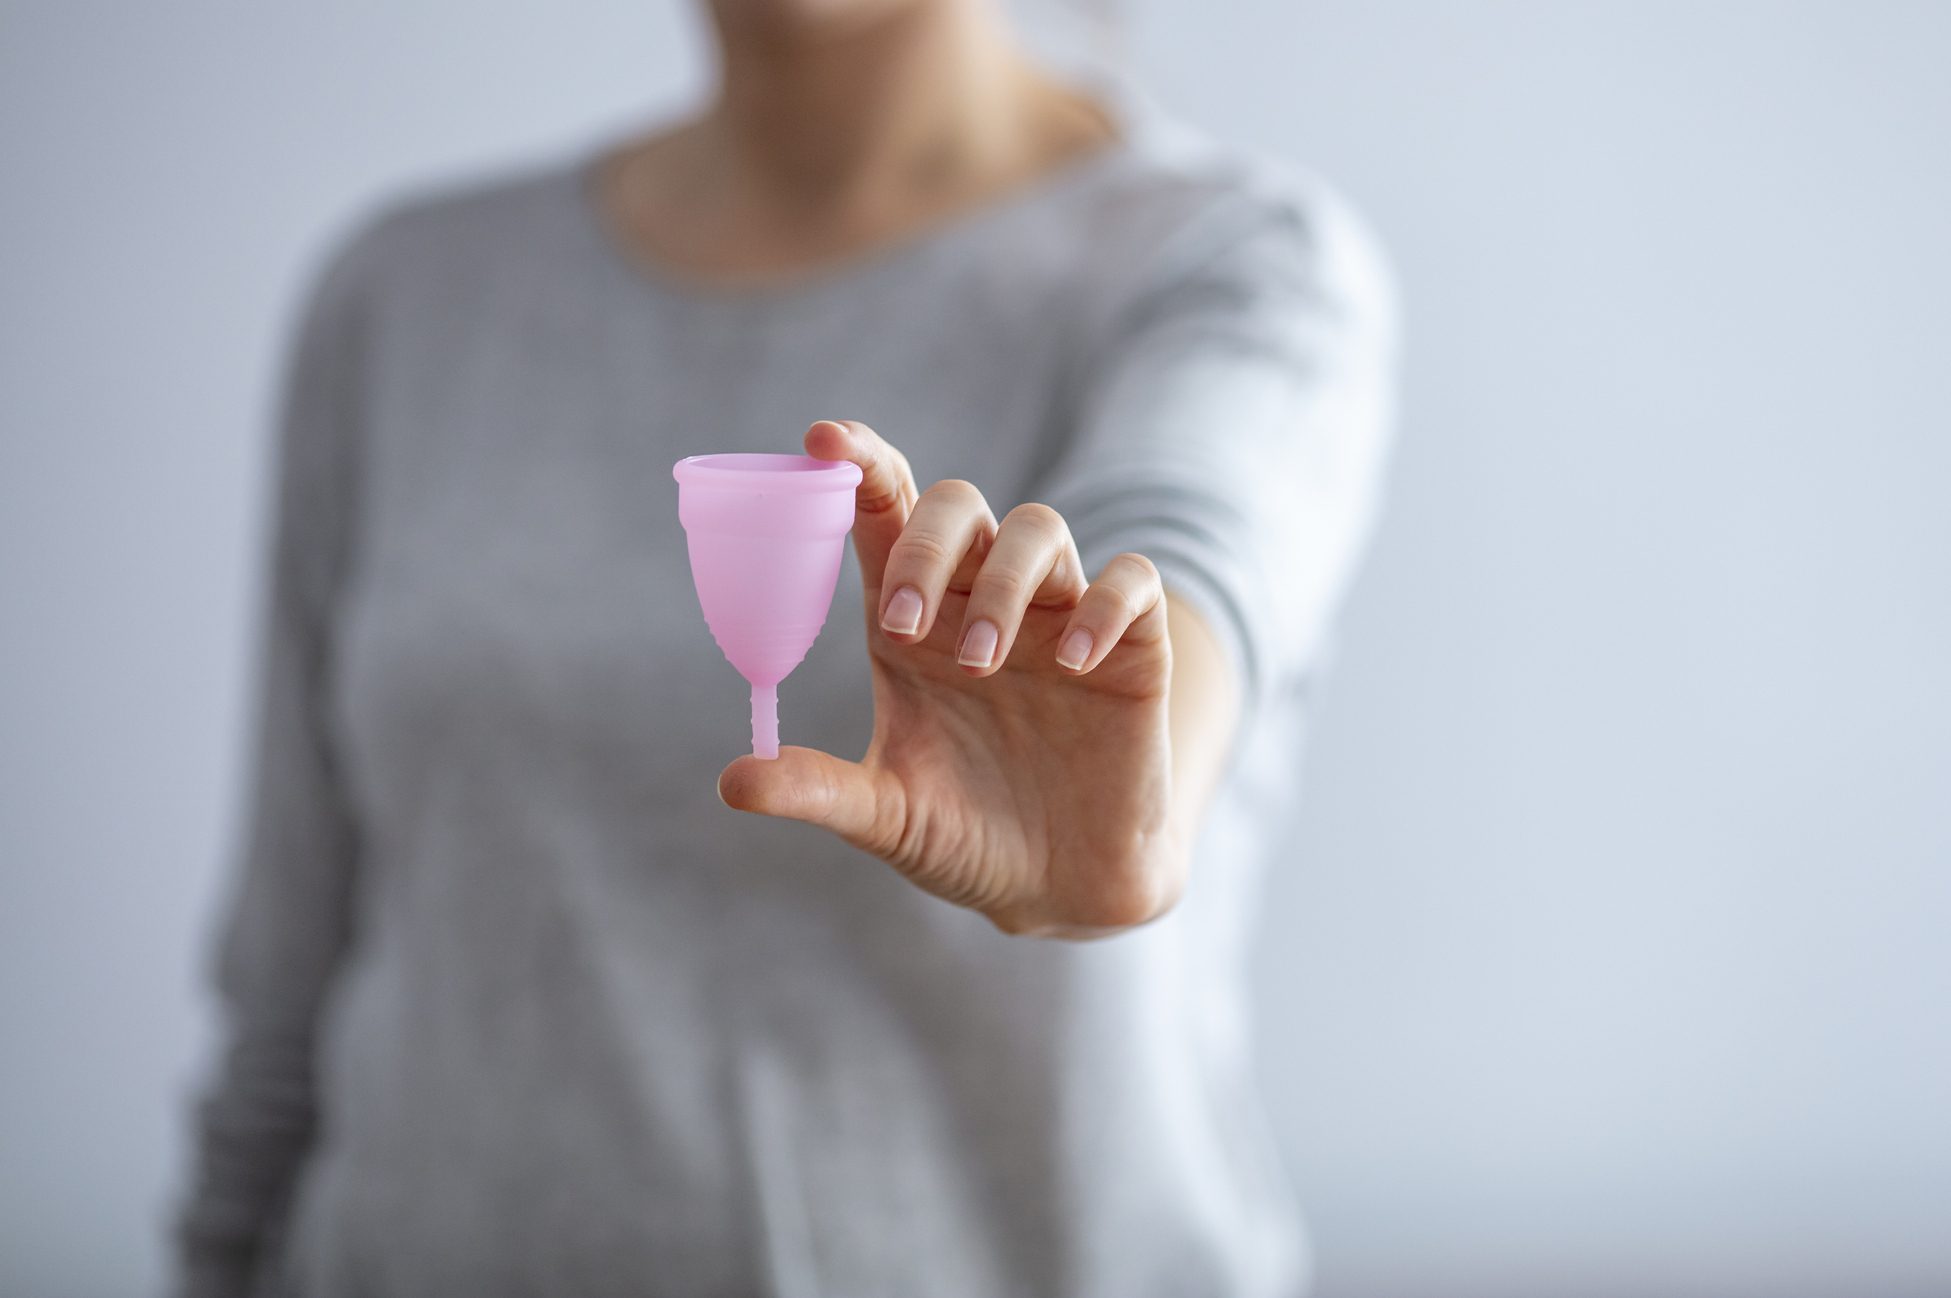 Can a Menstrual Cup Displace an IUD? A Doctor Says It's a "Growing" Concern